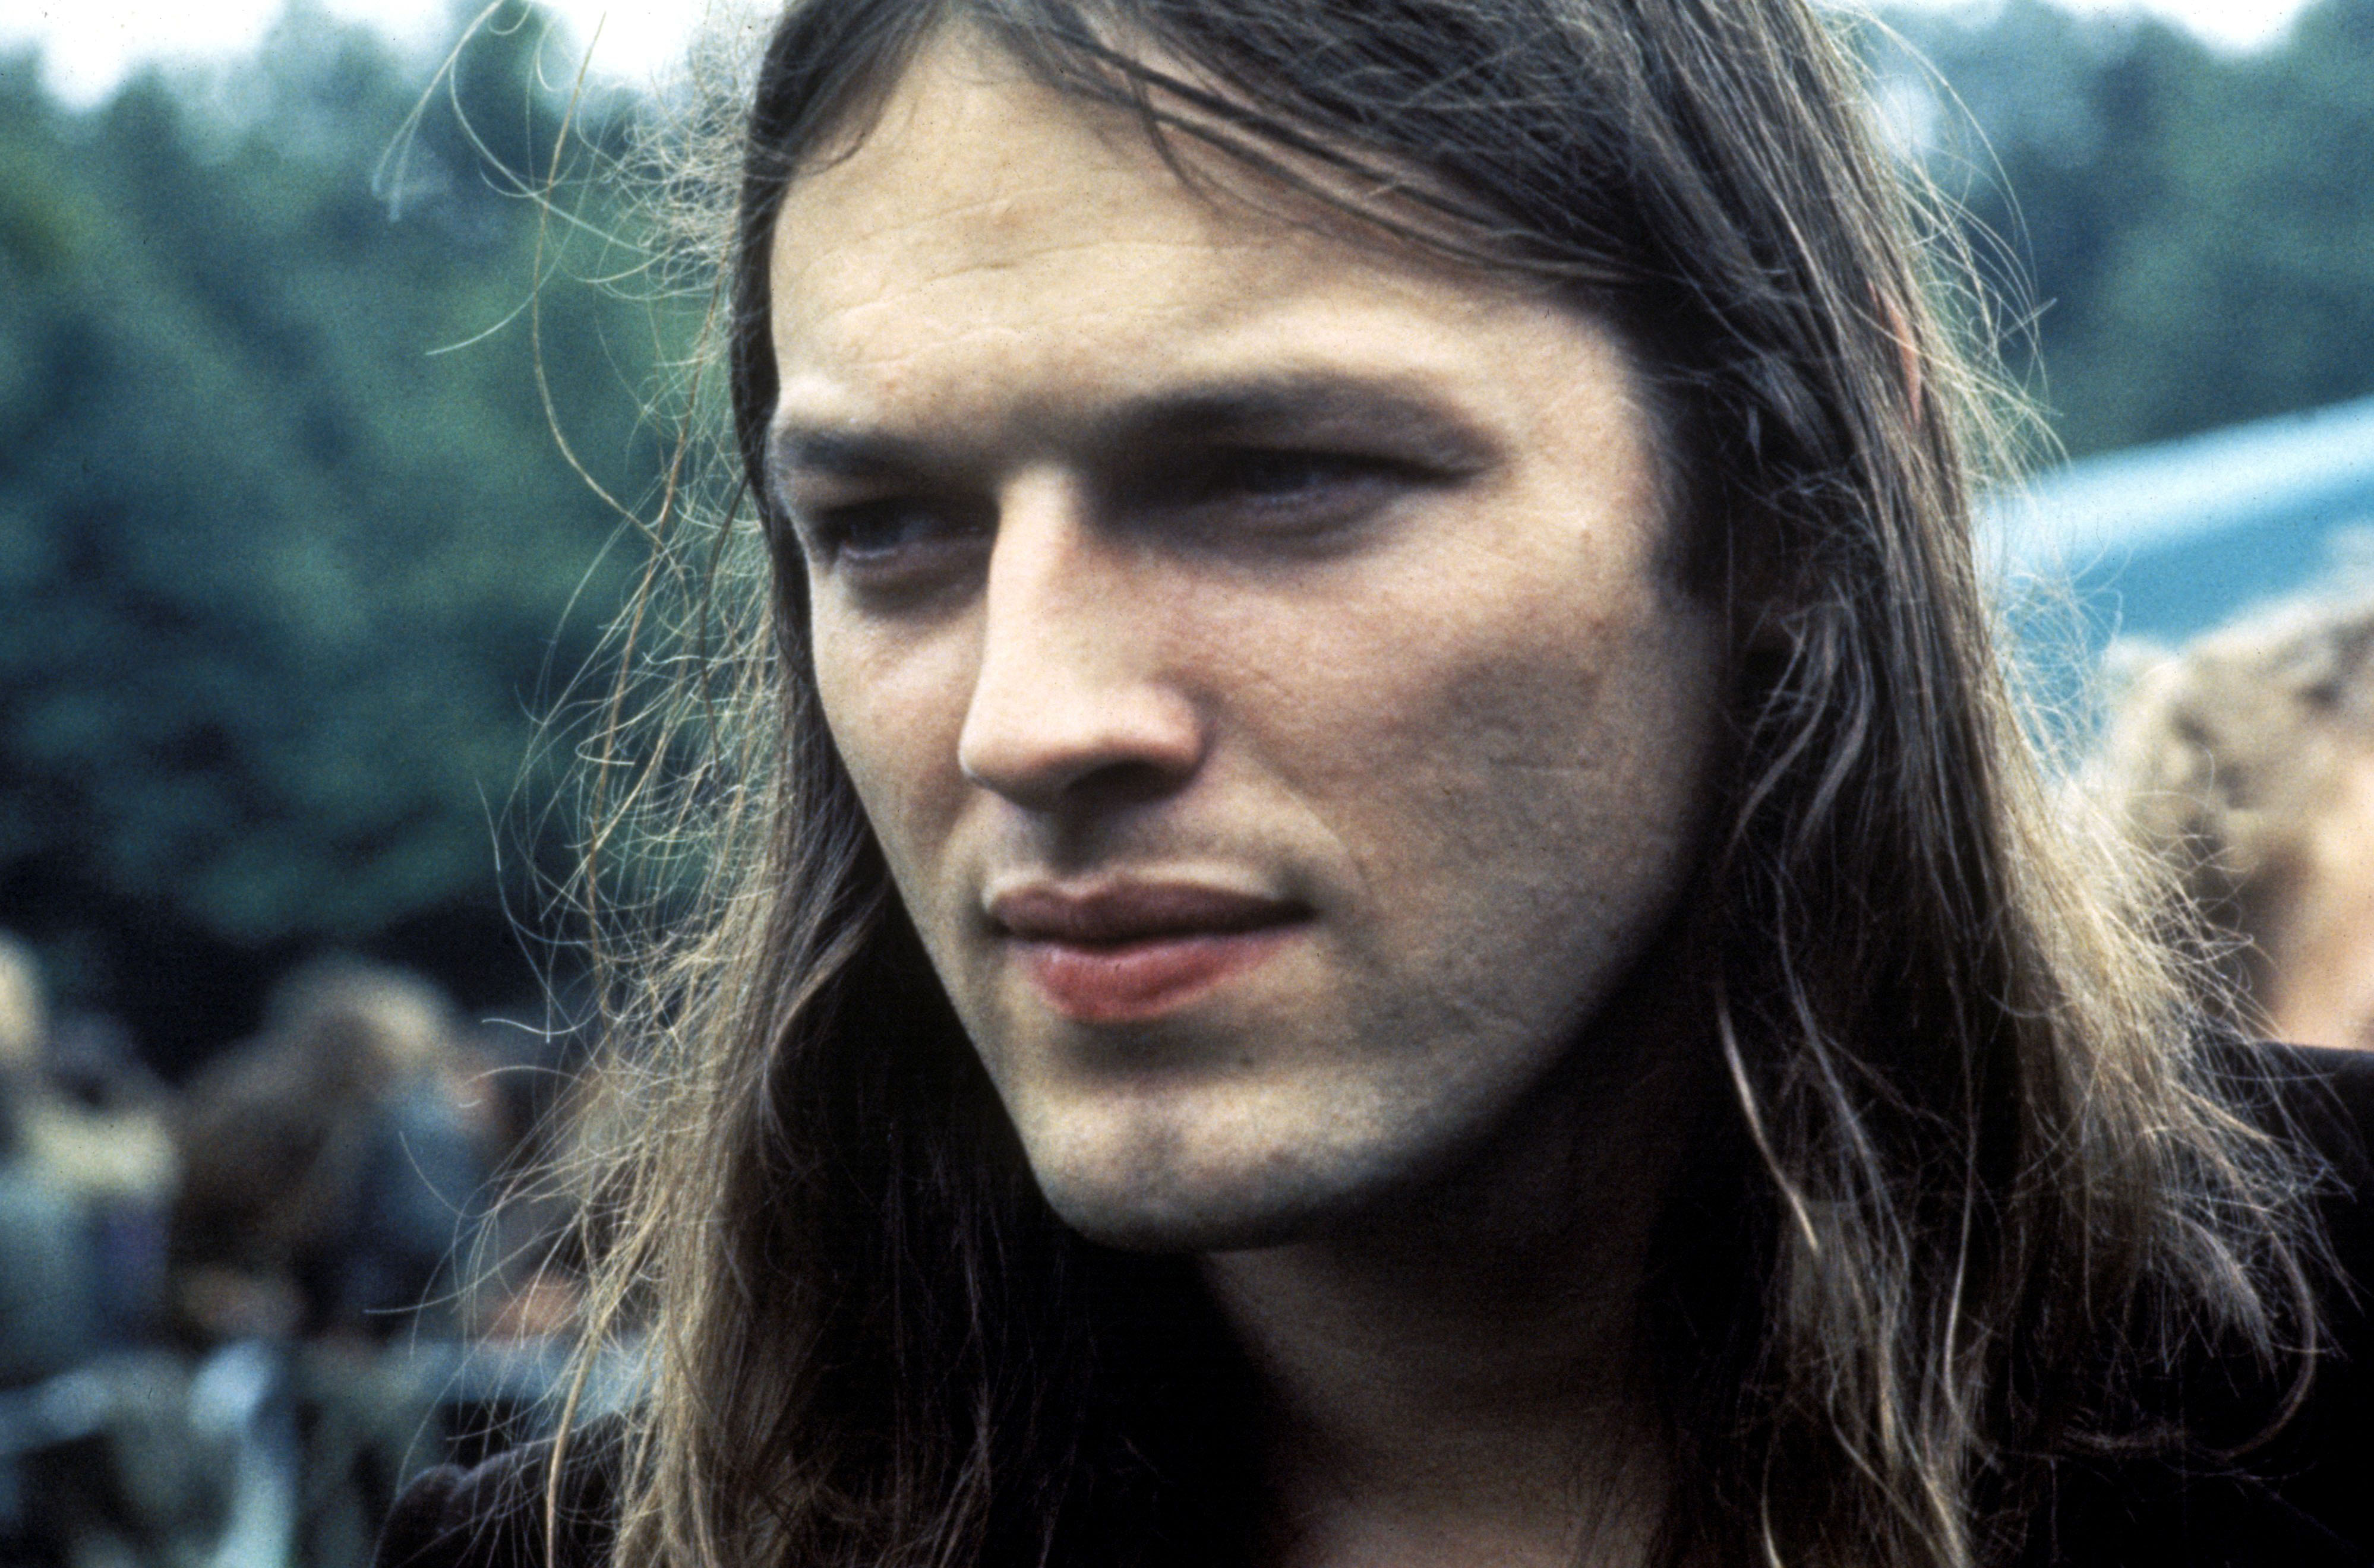 David Gilmour found fame with Pink Floyd in the seventies